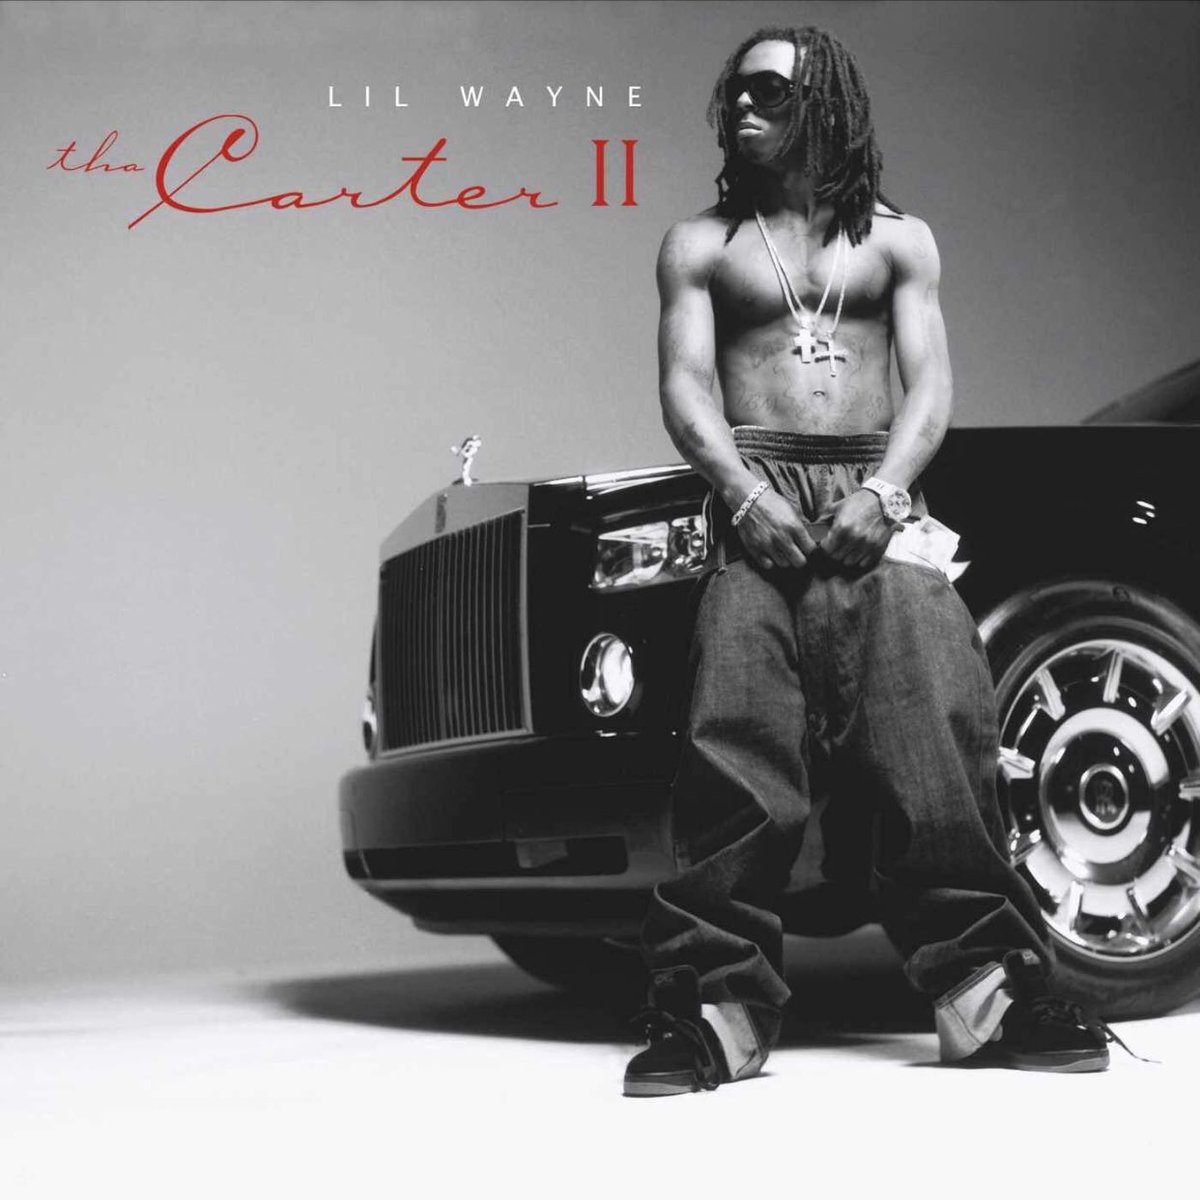 One of Lil Wayne’s album has to go. Which one?